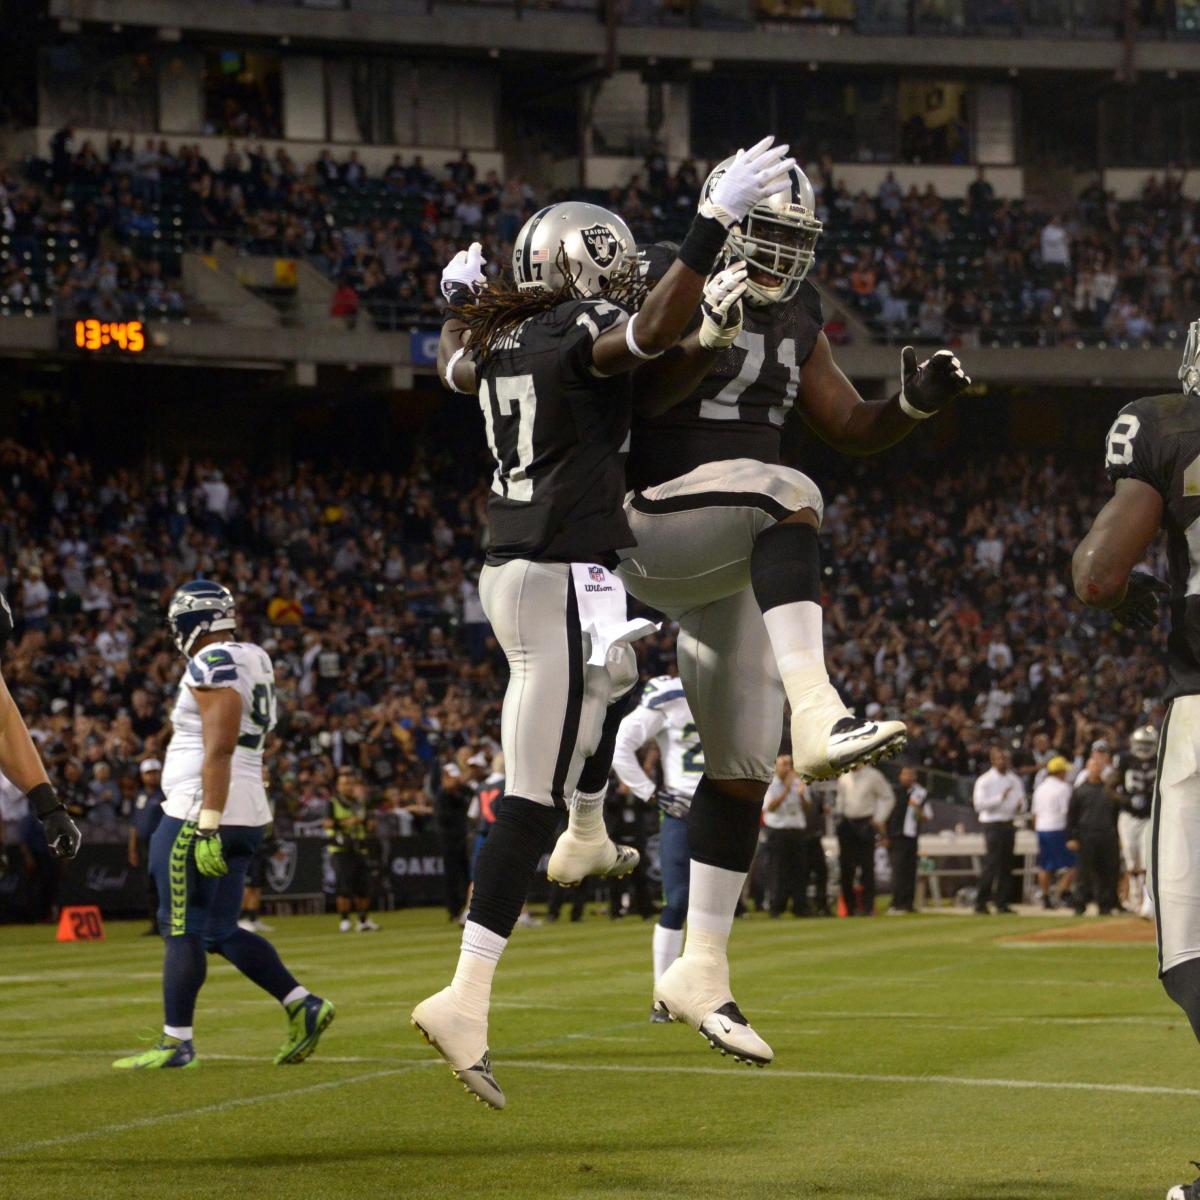 Raiders: Final 53-man roster projection - Silver And Black Pride